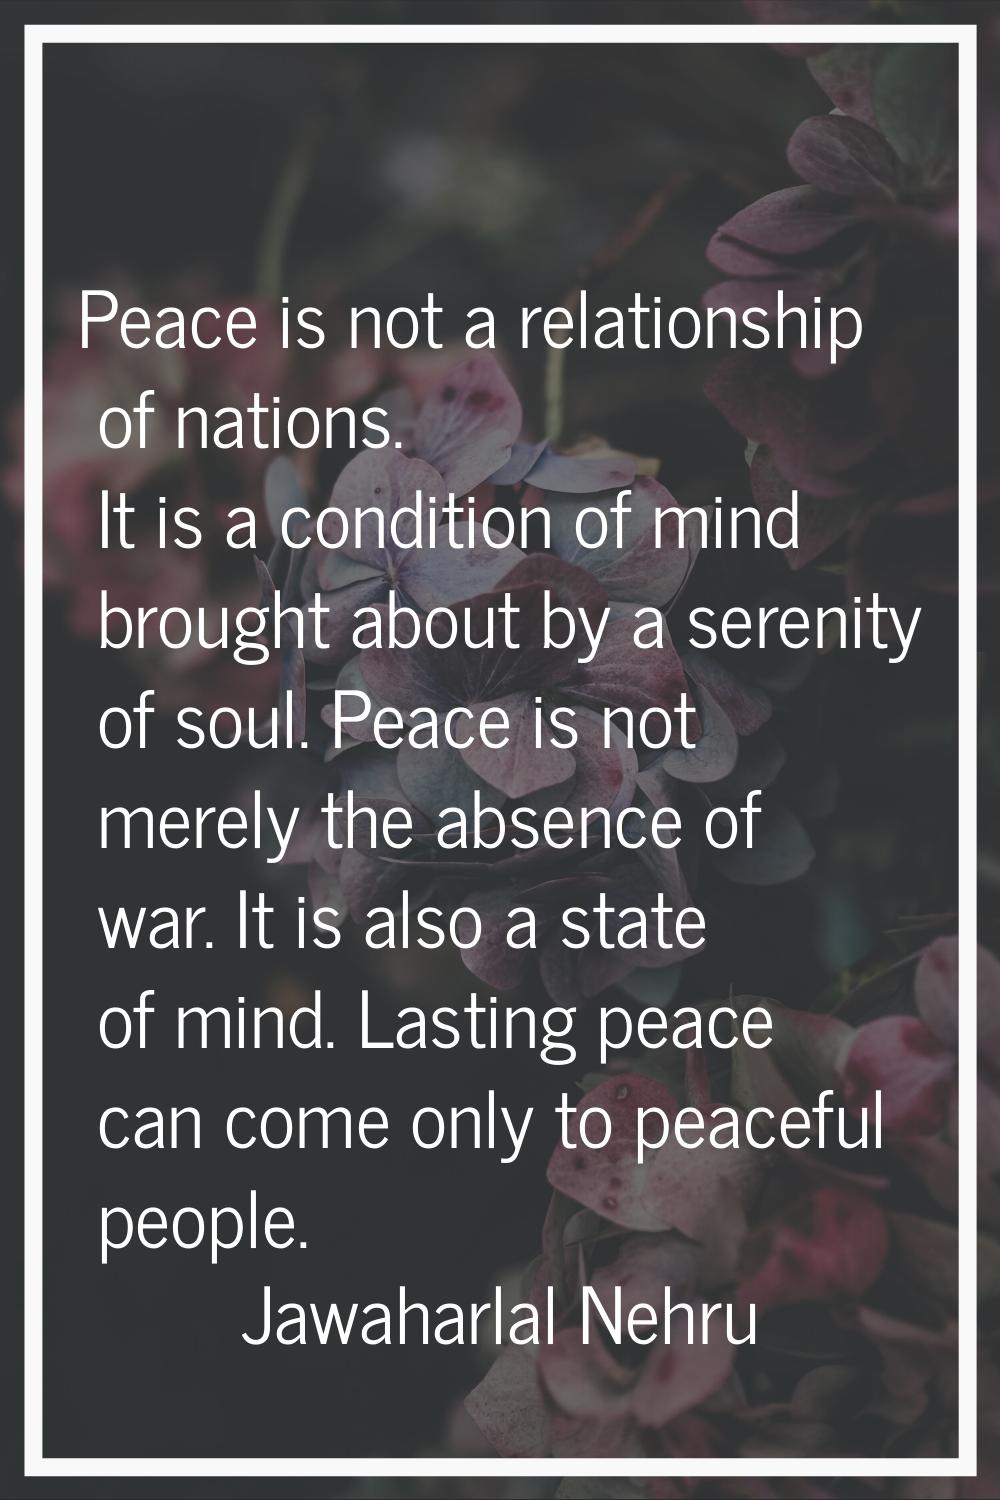 Peace is not a relationship of nations. It is a condition of mind brought about by a serenity of so